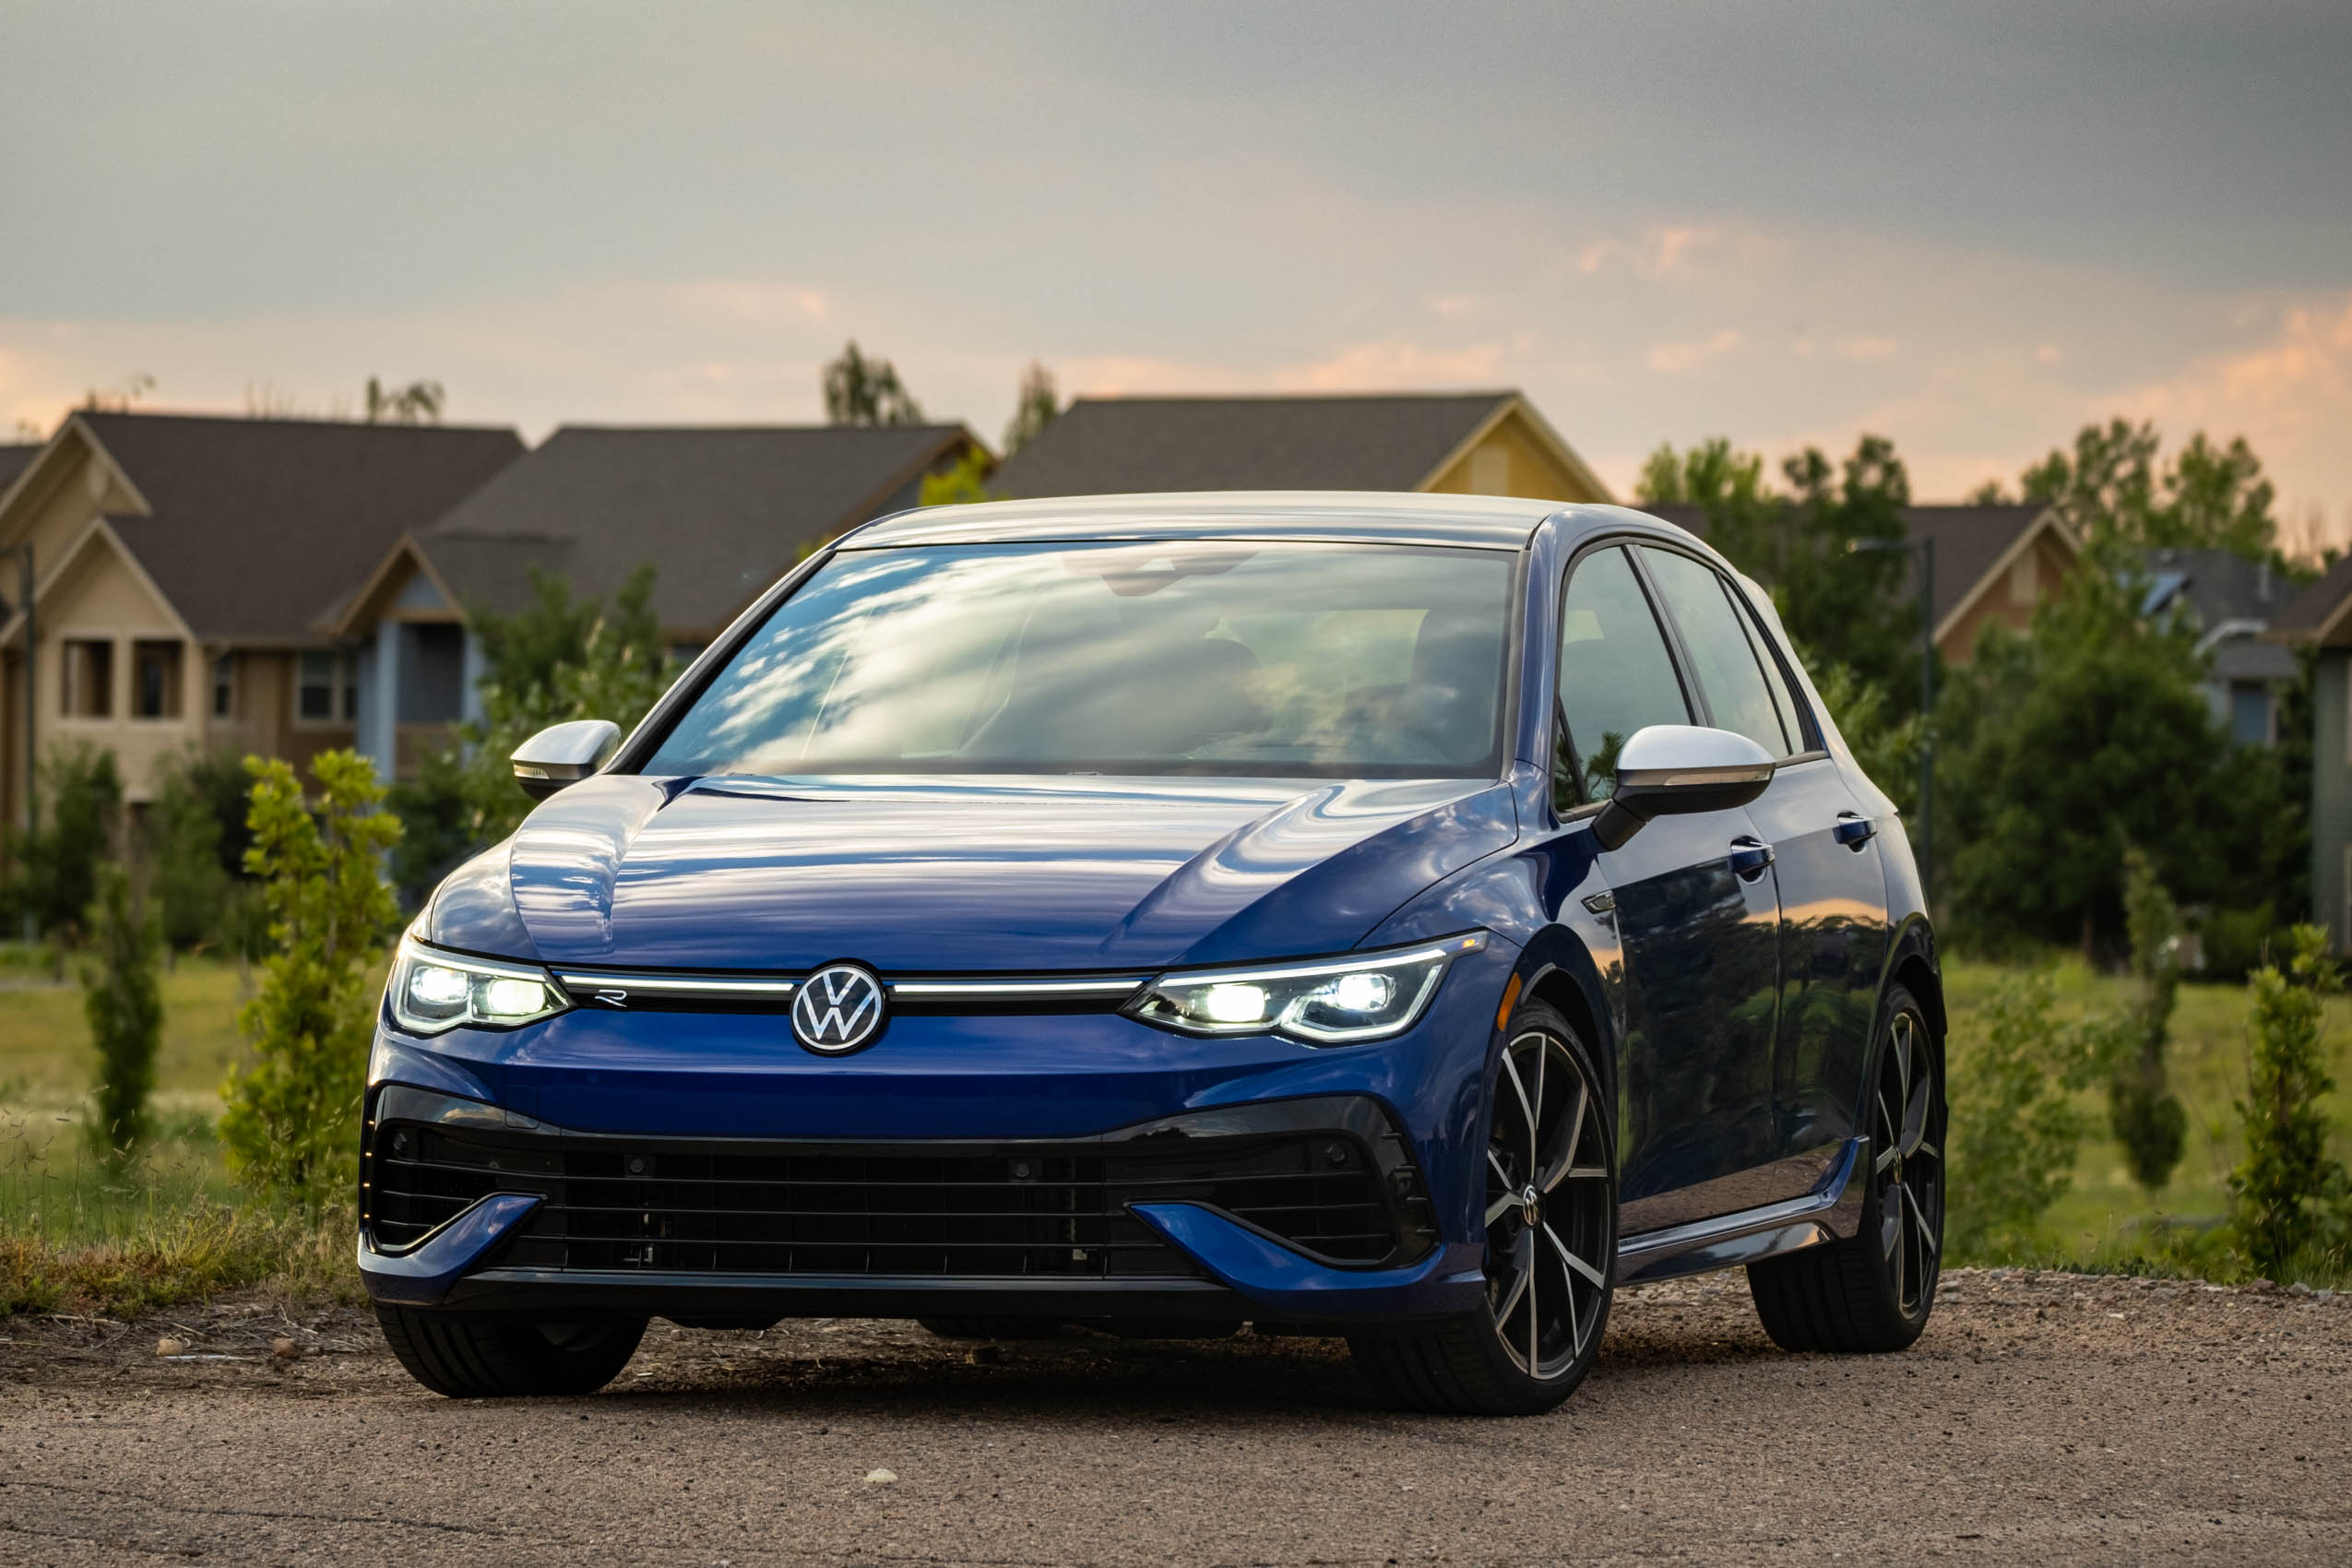 2022 Volkswagen Golf R First Drive Review: The Hot Hatch For Adults